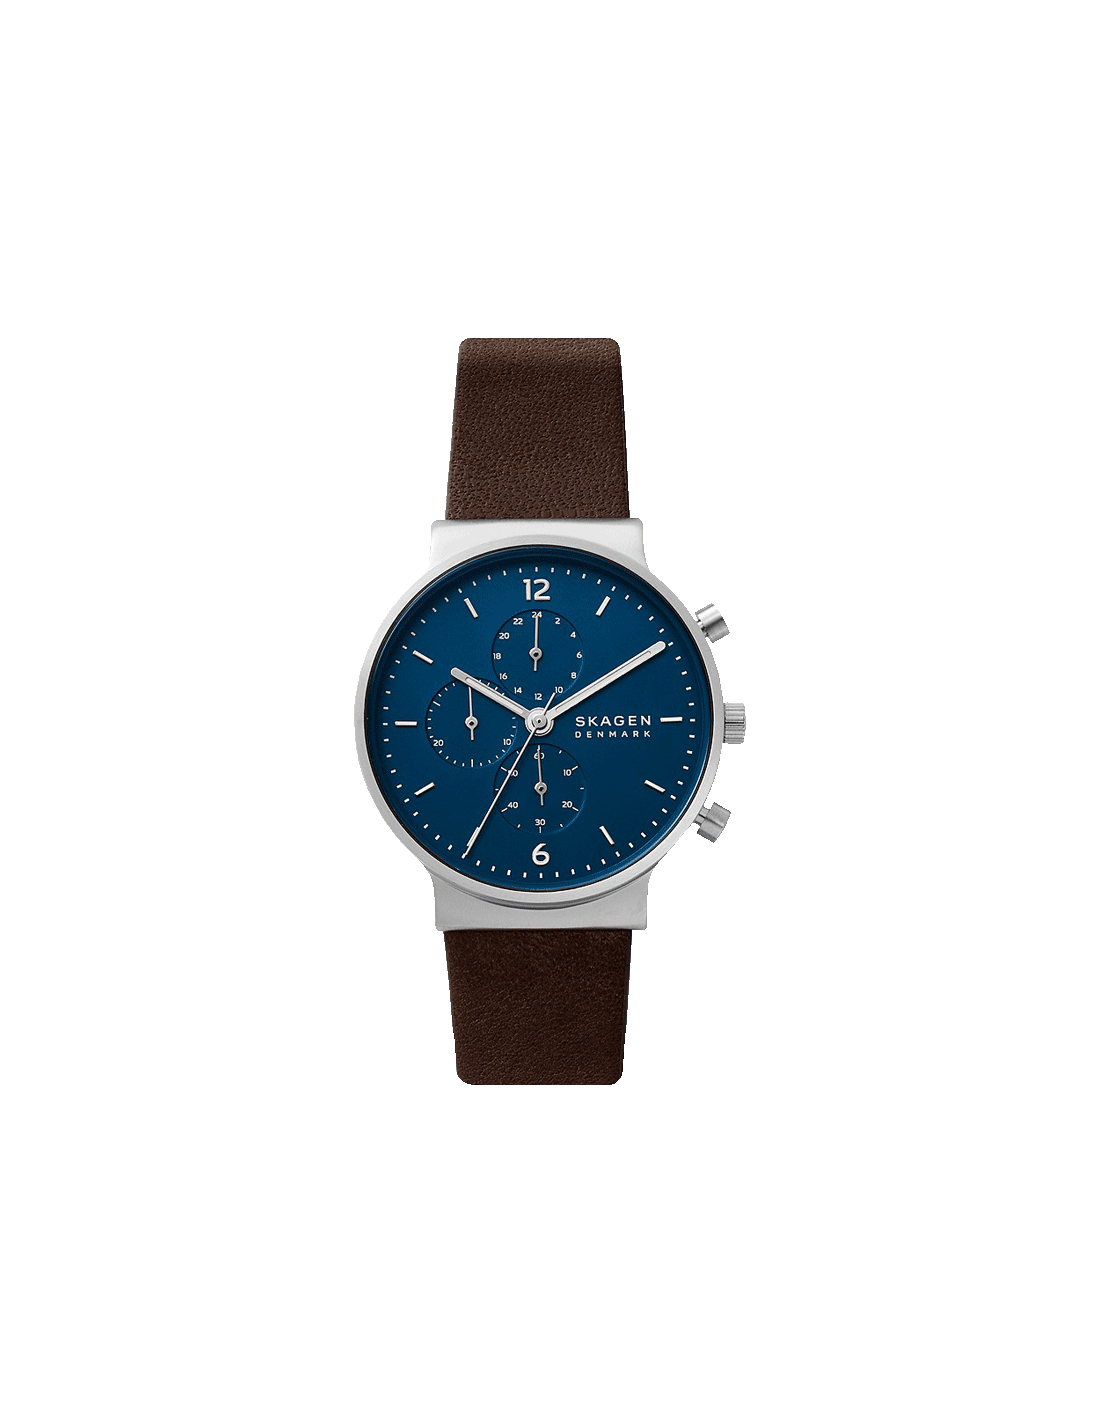 Buy Skagen SKW6765 I Watch in India I Swiss Time House